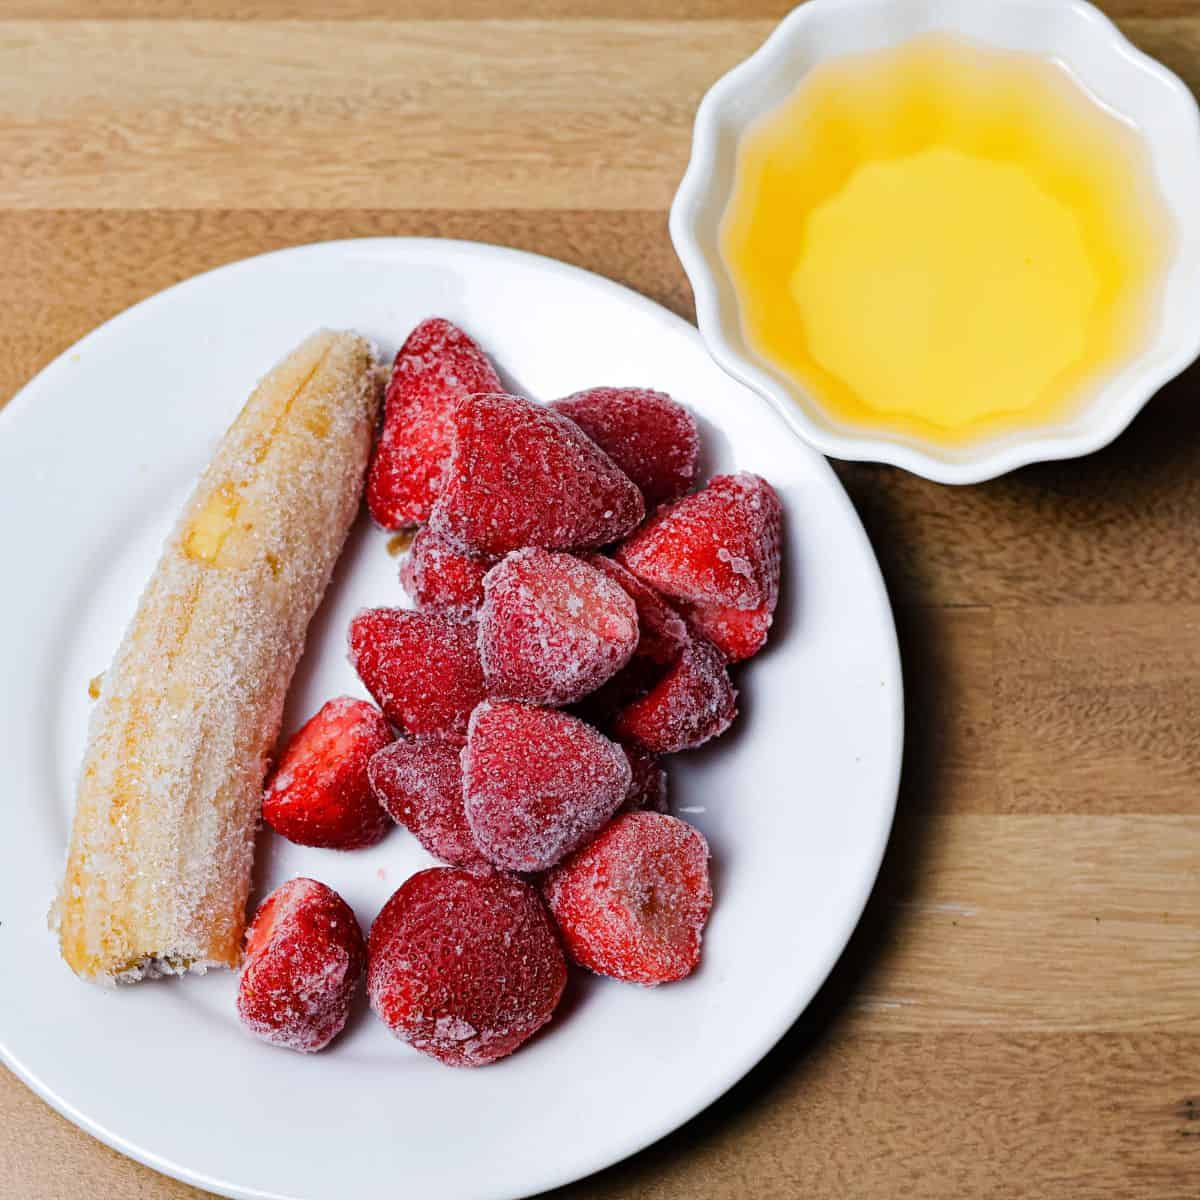 A plate with a whole frozen banana beside a mound of frozen strawberries, with a small bowl of apple juice to the side, ingredients prepped for a smoothie.